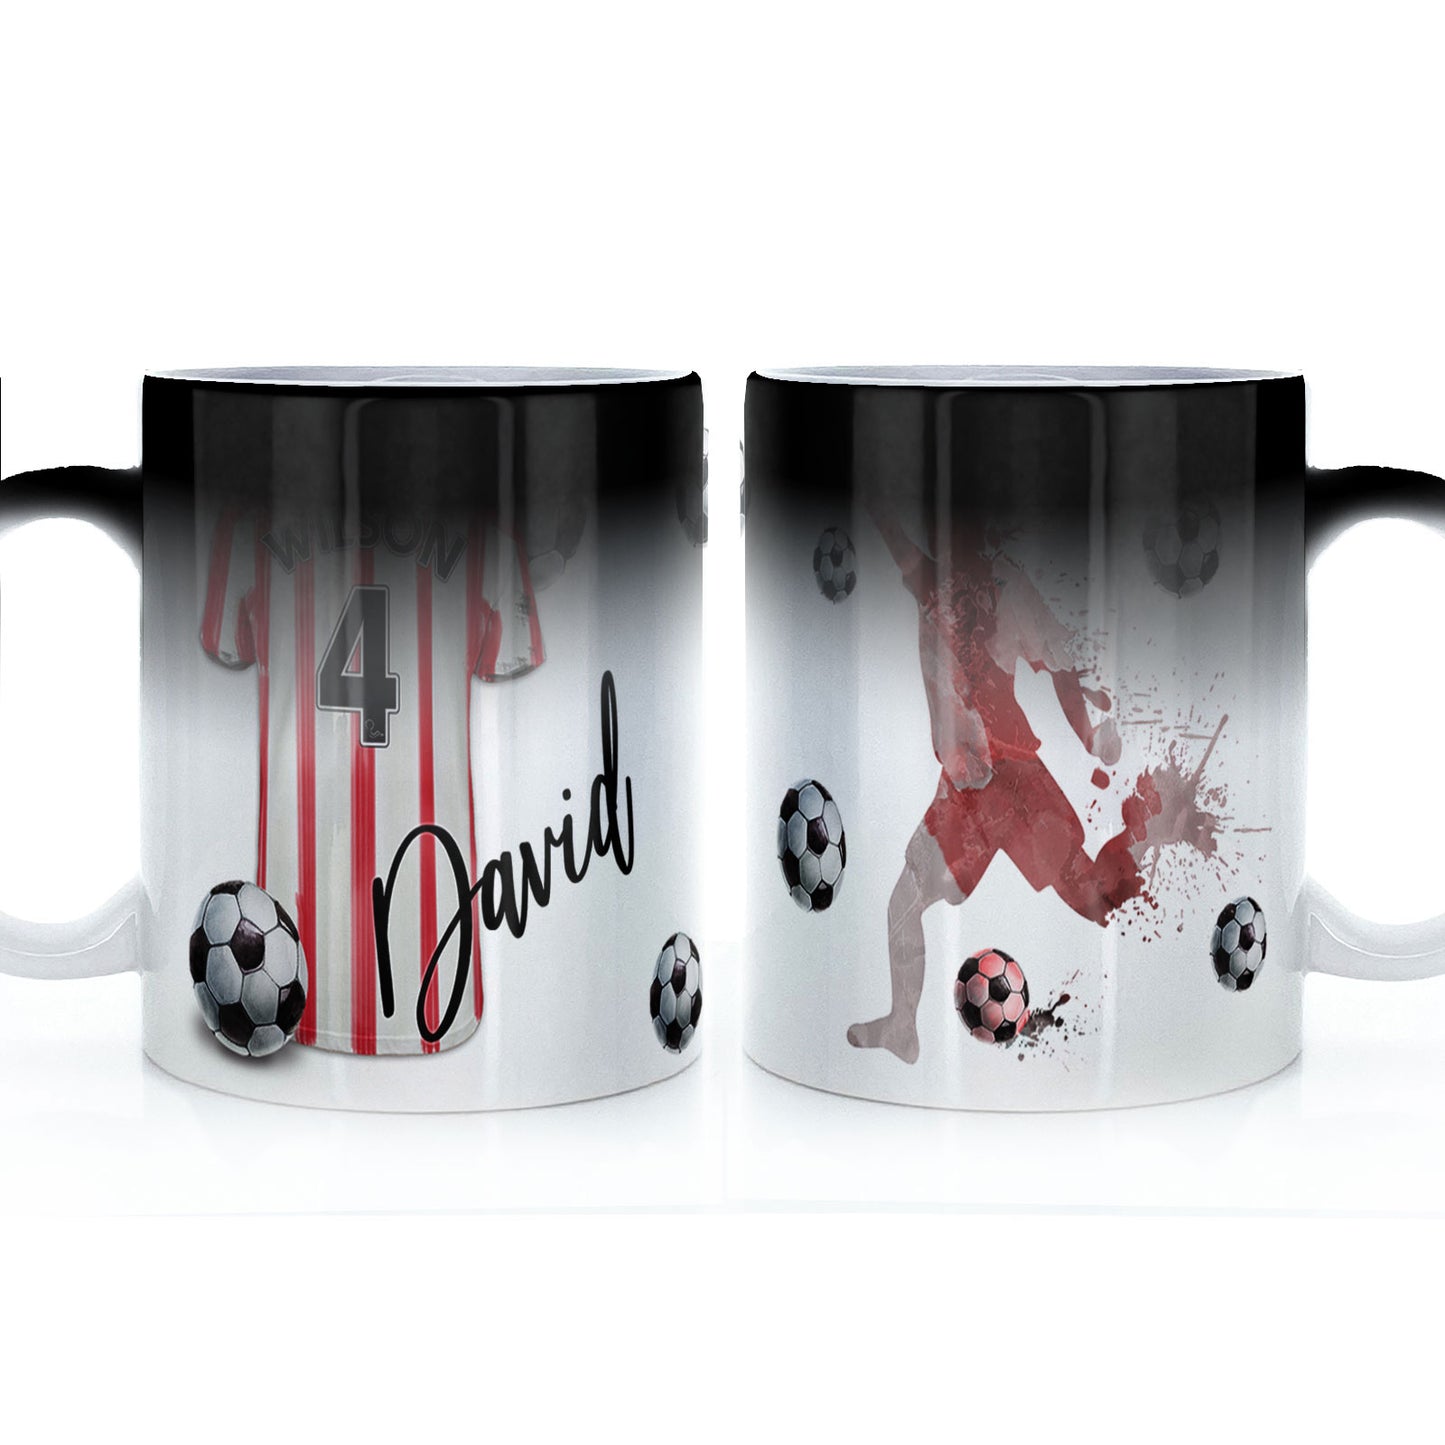 Personalised Mug with Stylish Text and White & Red Striped Shirt with Name & Number